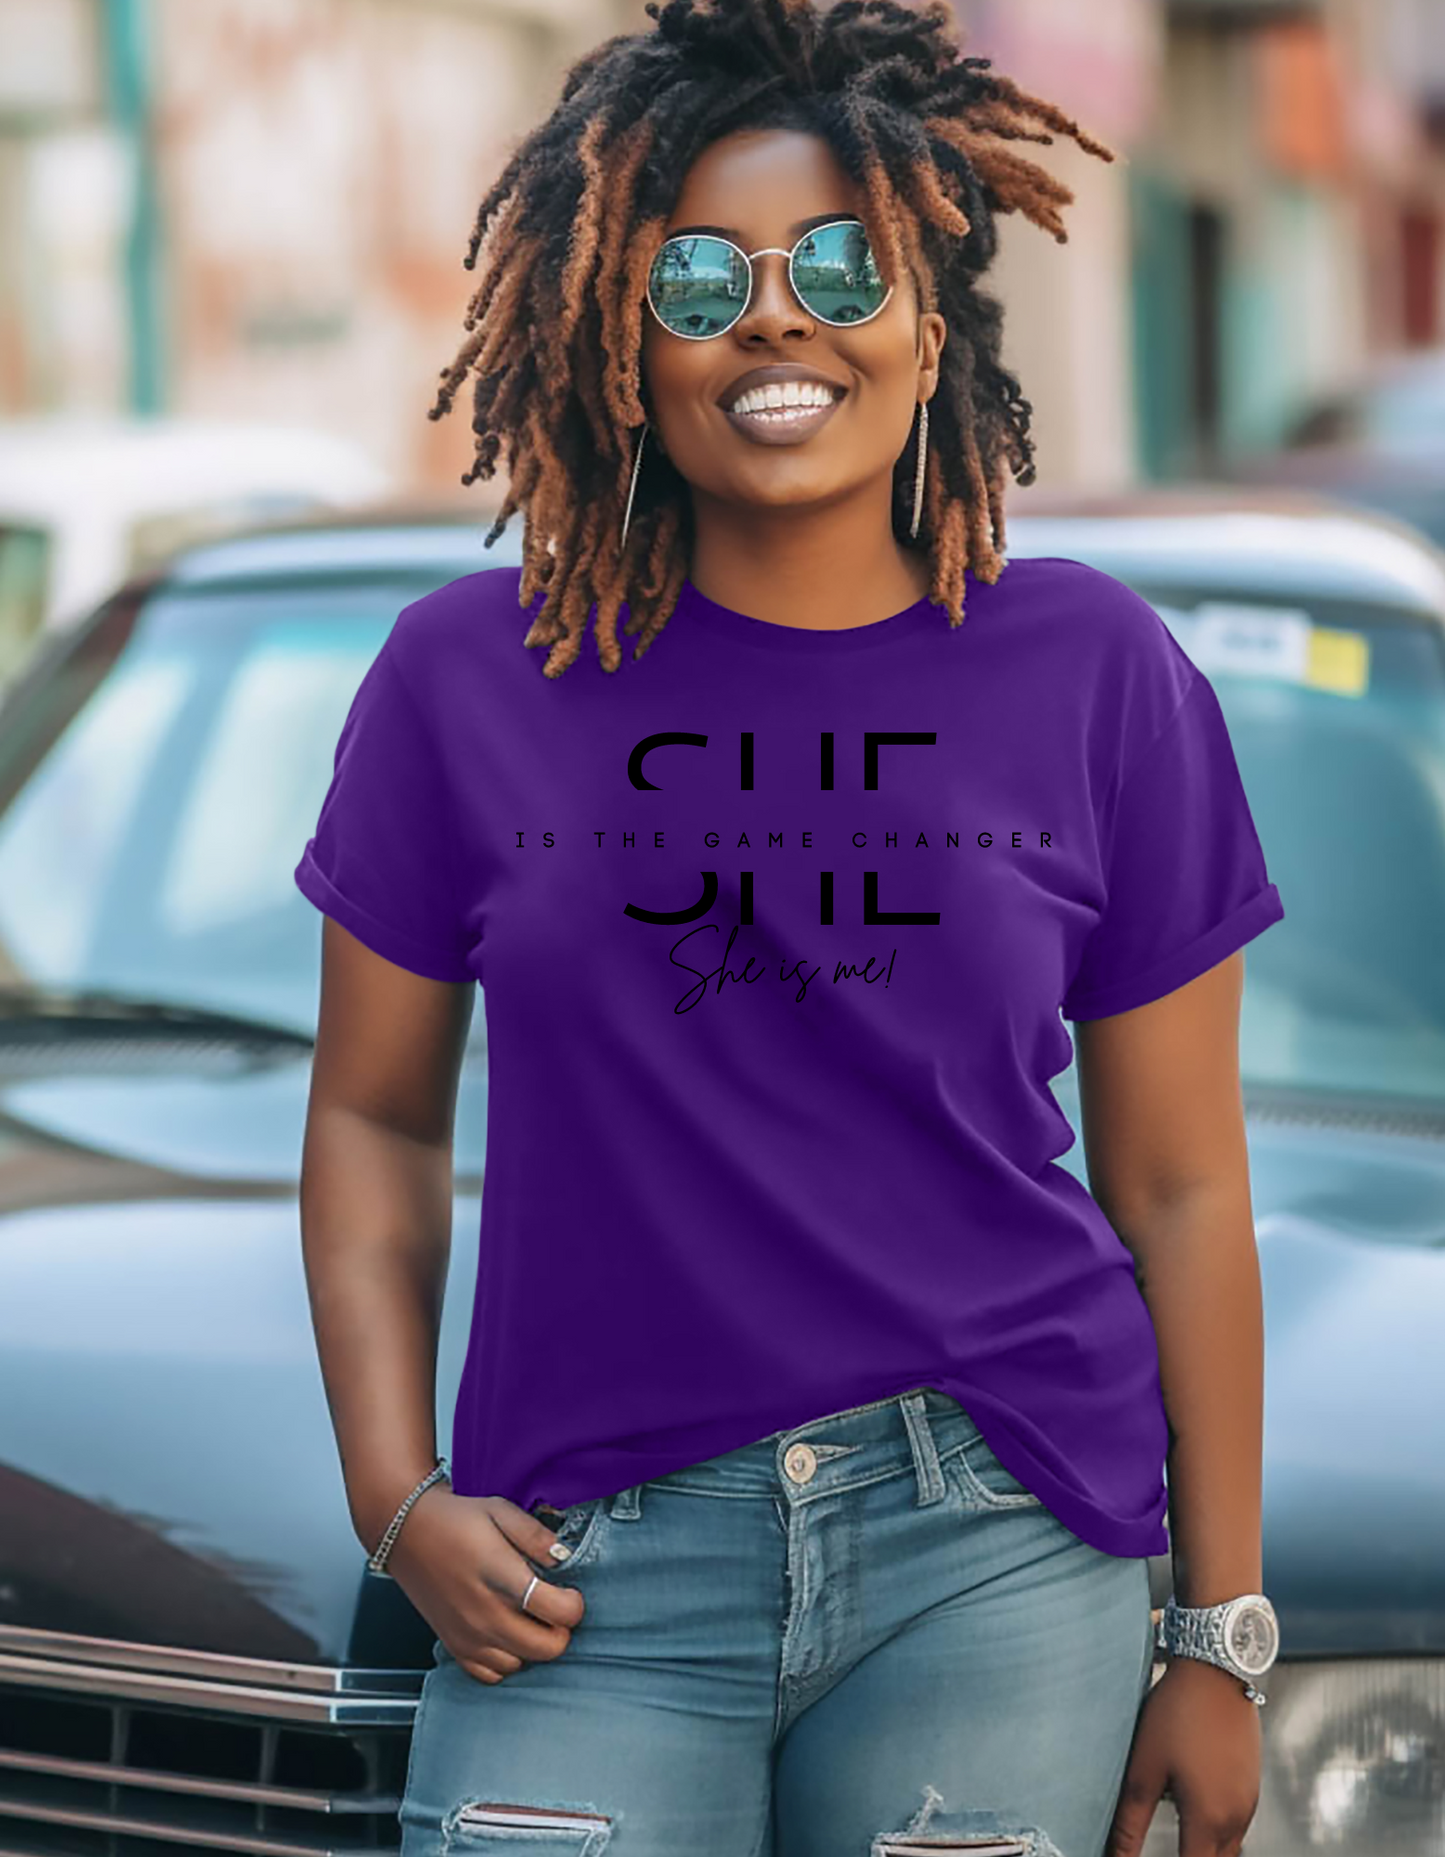 She Changed The Game Women's T-shirt, Women's History Month Tees, Mother's Day Shirt